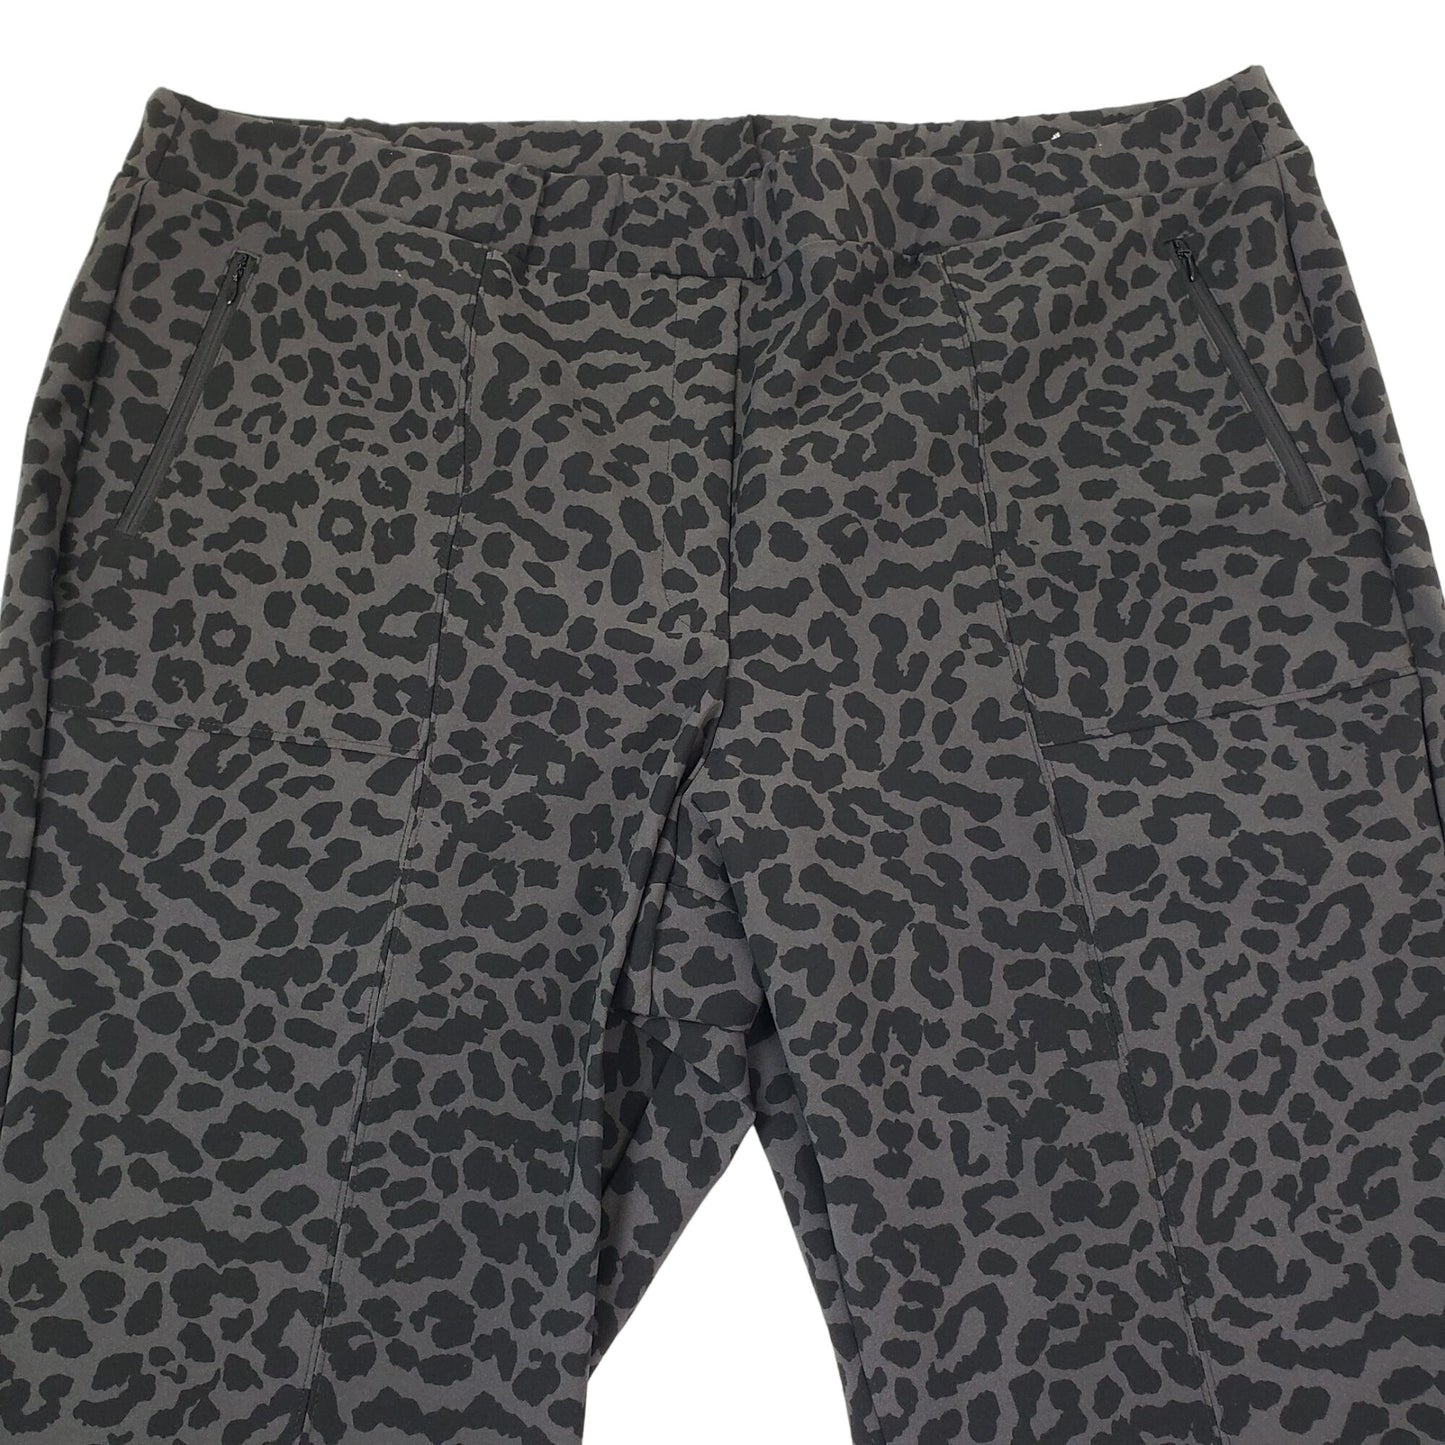 Lane Bryant On-the-Go Slim Ankle Pant in Leopard Print Size 28